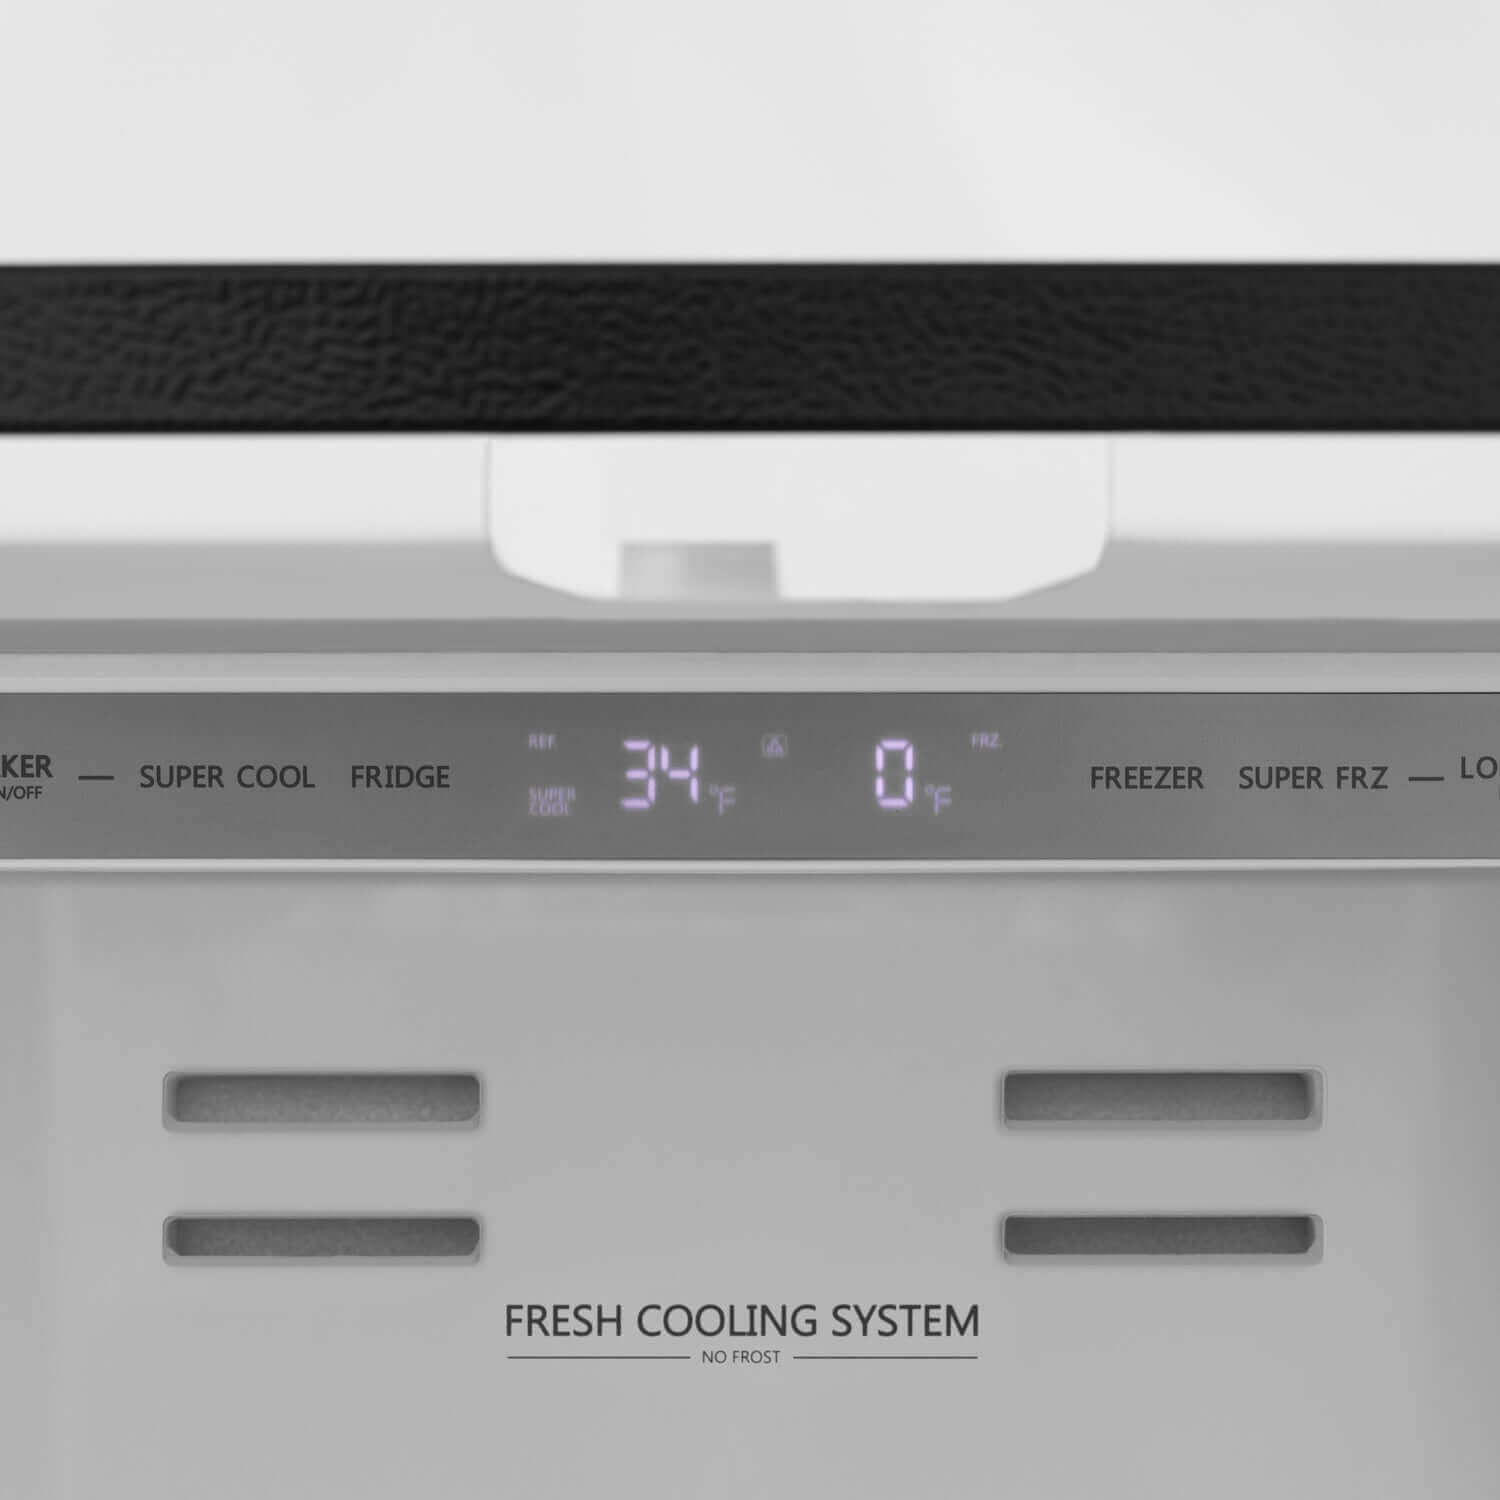 Fresh cooling system and temperature control inside ZLINE 36" French door refrigerator.